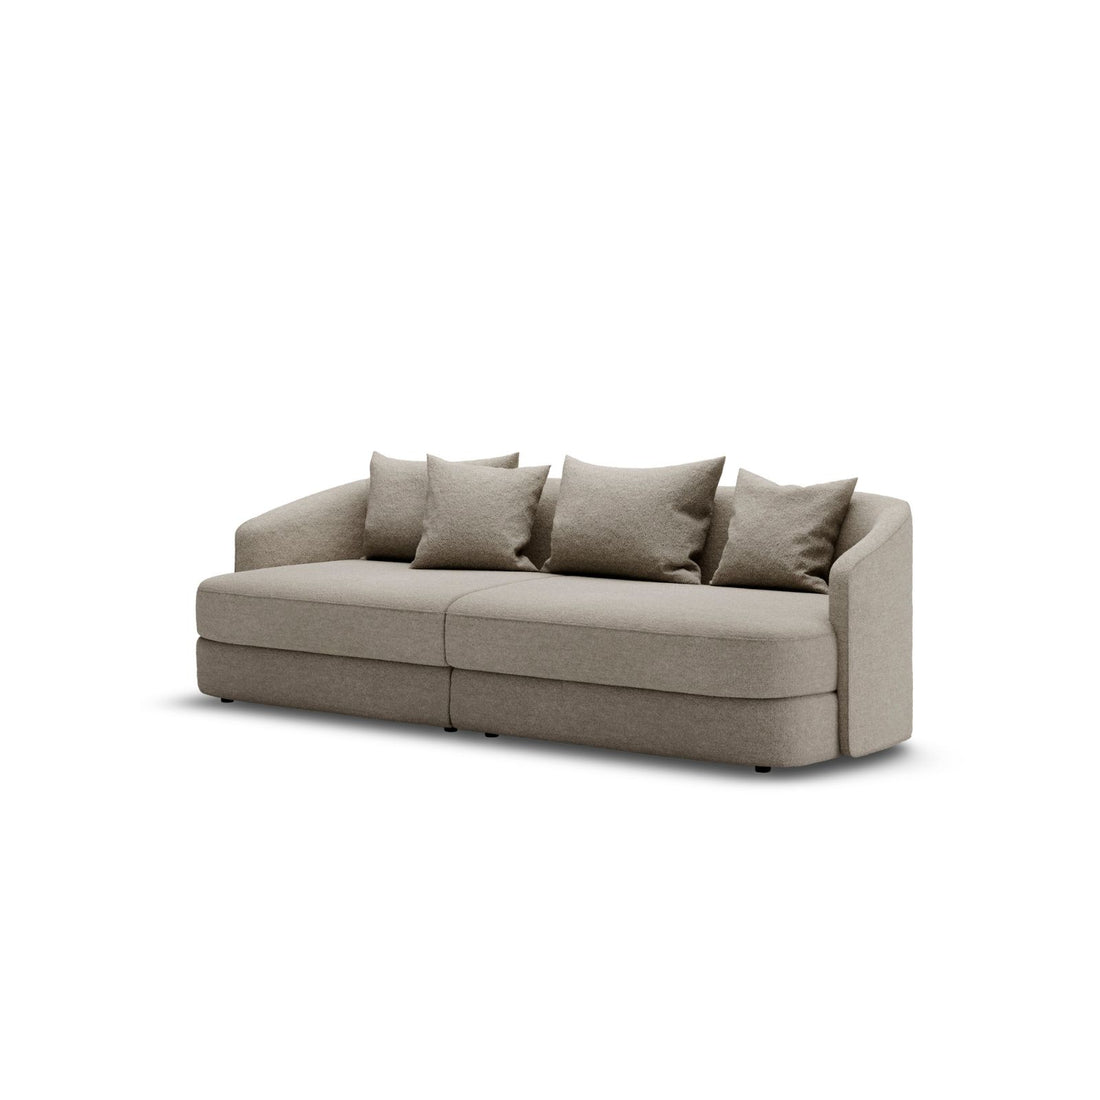 Covent Residential | Sofa 3 seaters